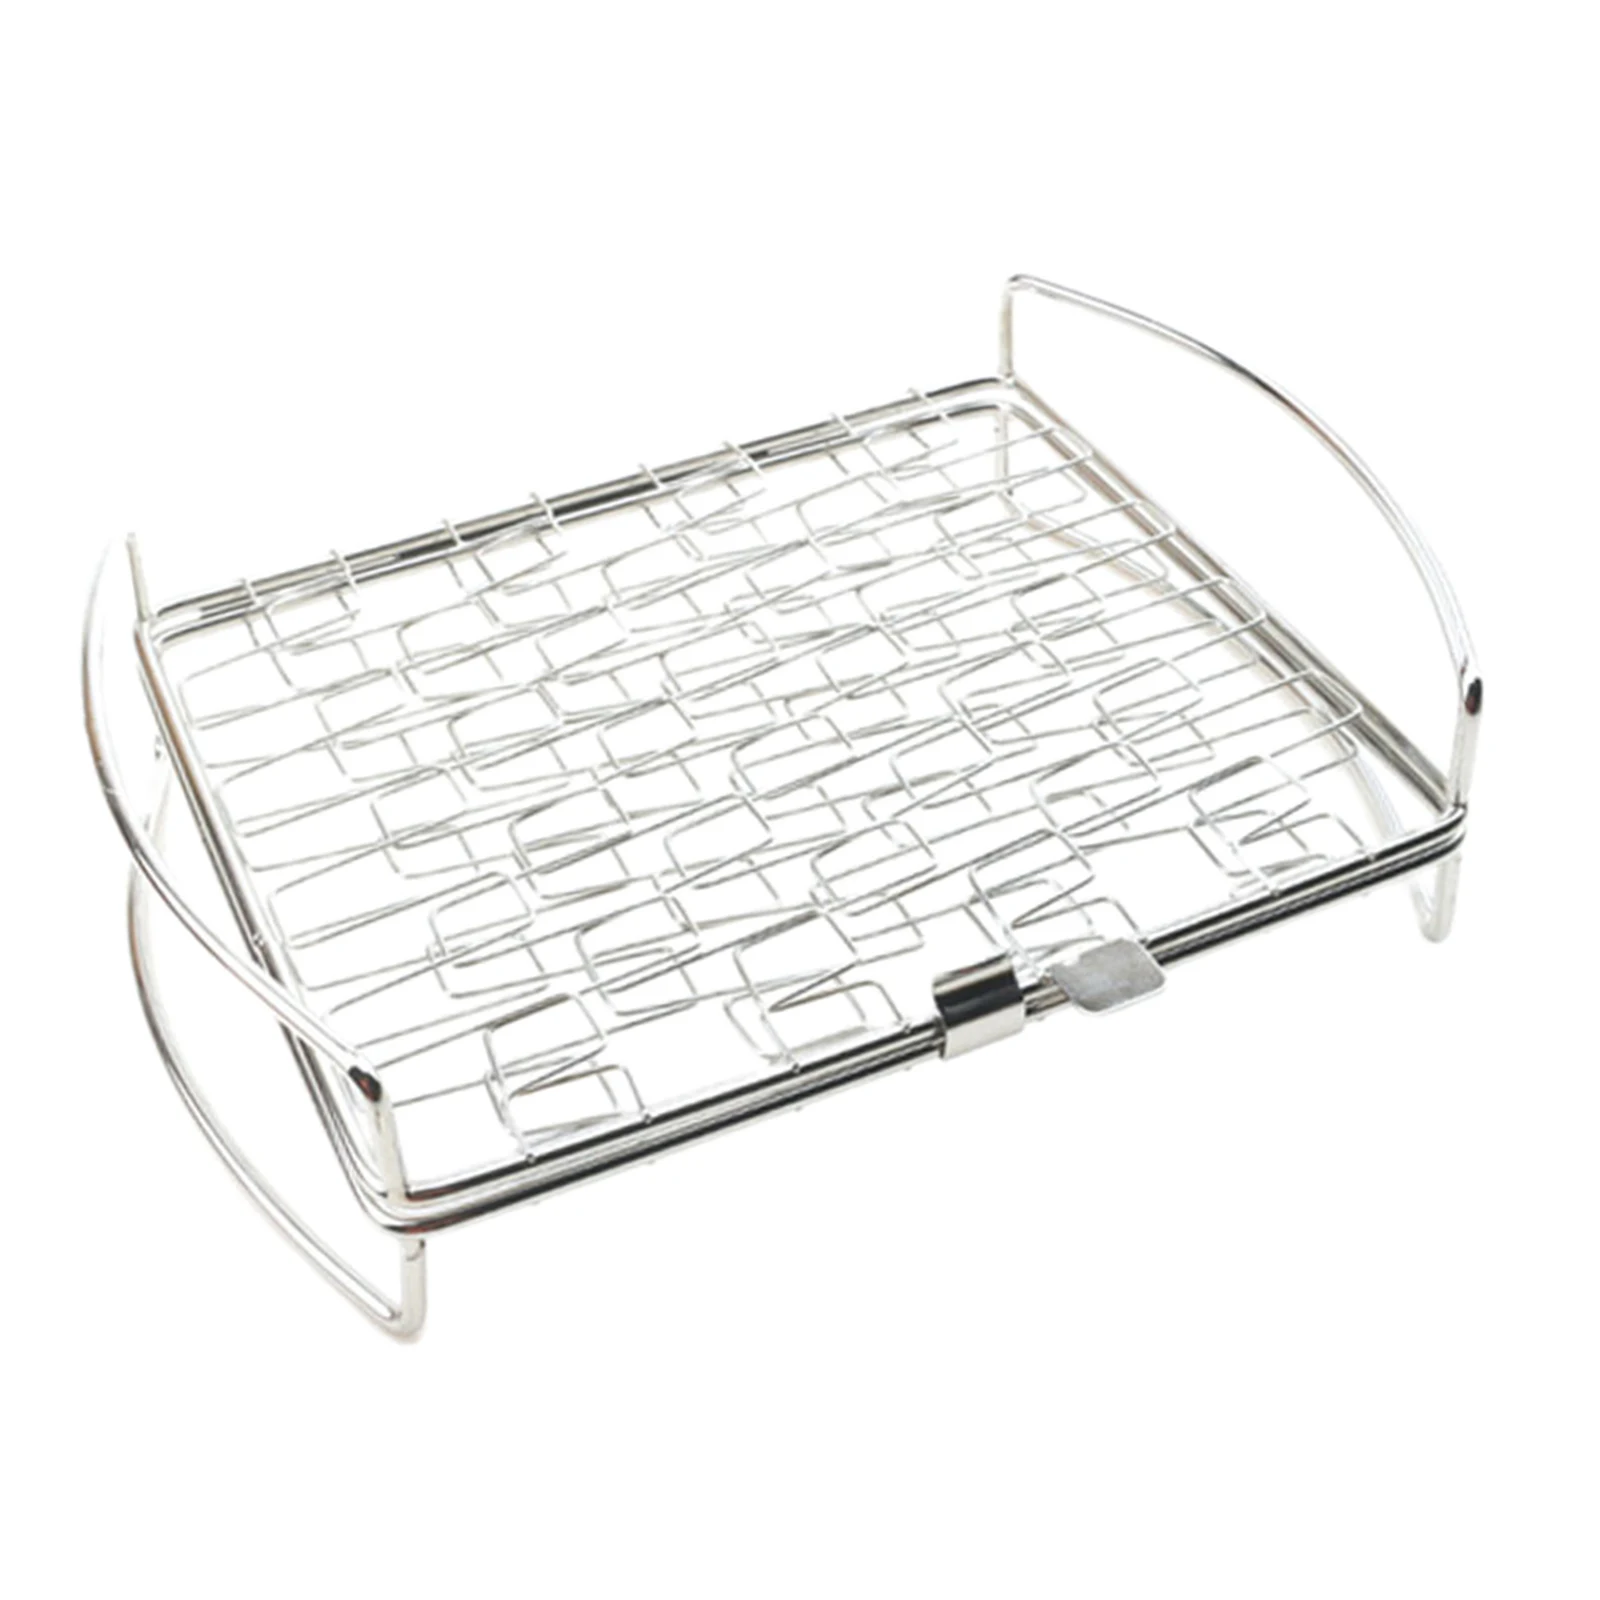 Stainless Steel Grilling Basket Non-stick Folding Grill Net BBQ Net for Grilling Meat Fish Chicken Outdoor Camping Picnic Tool